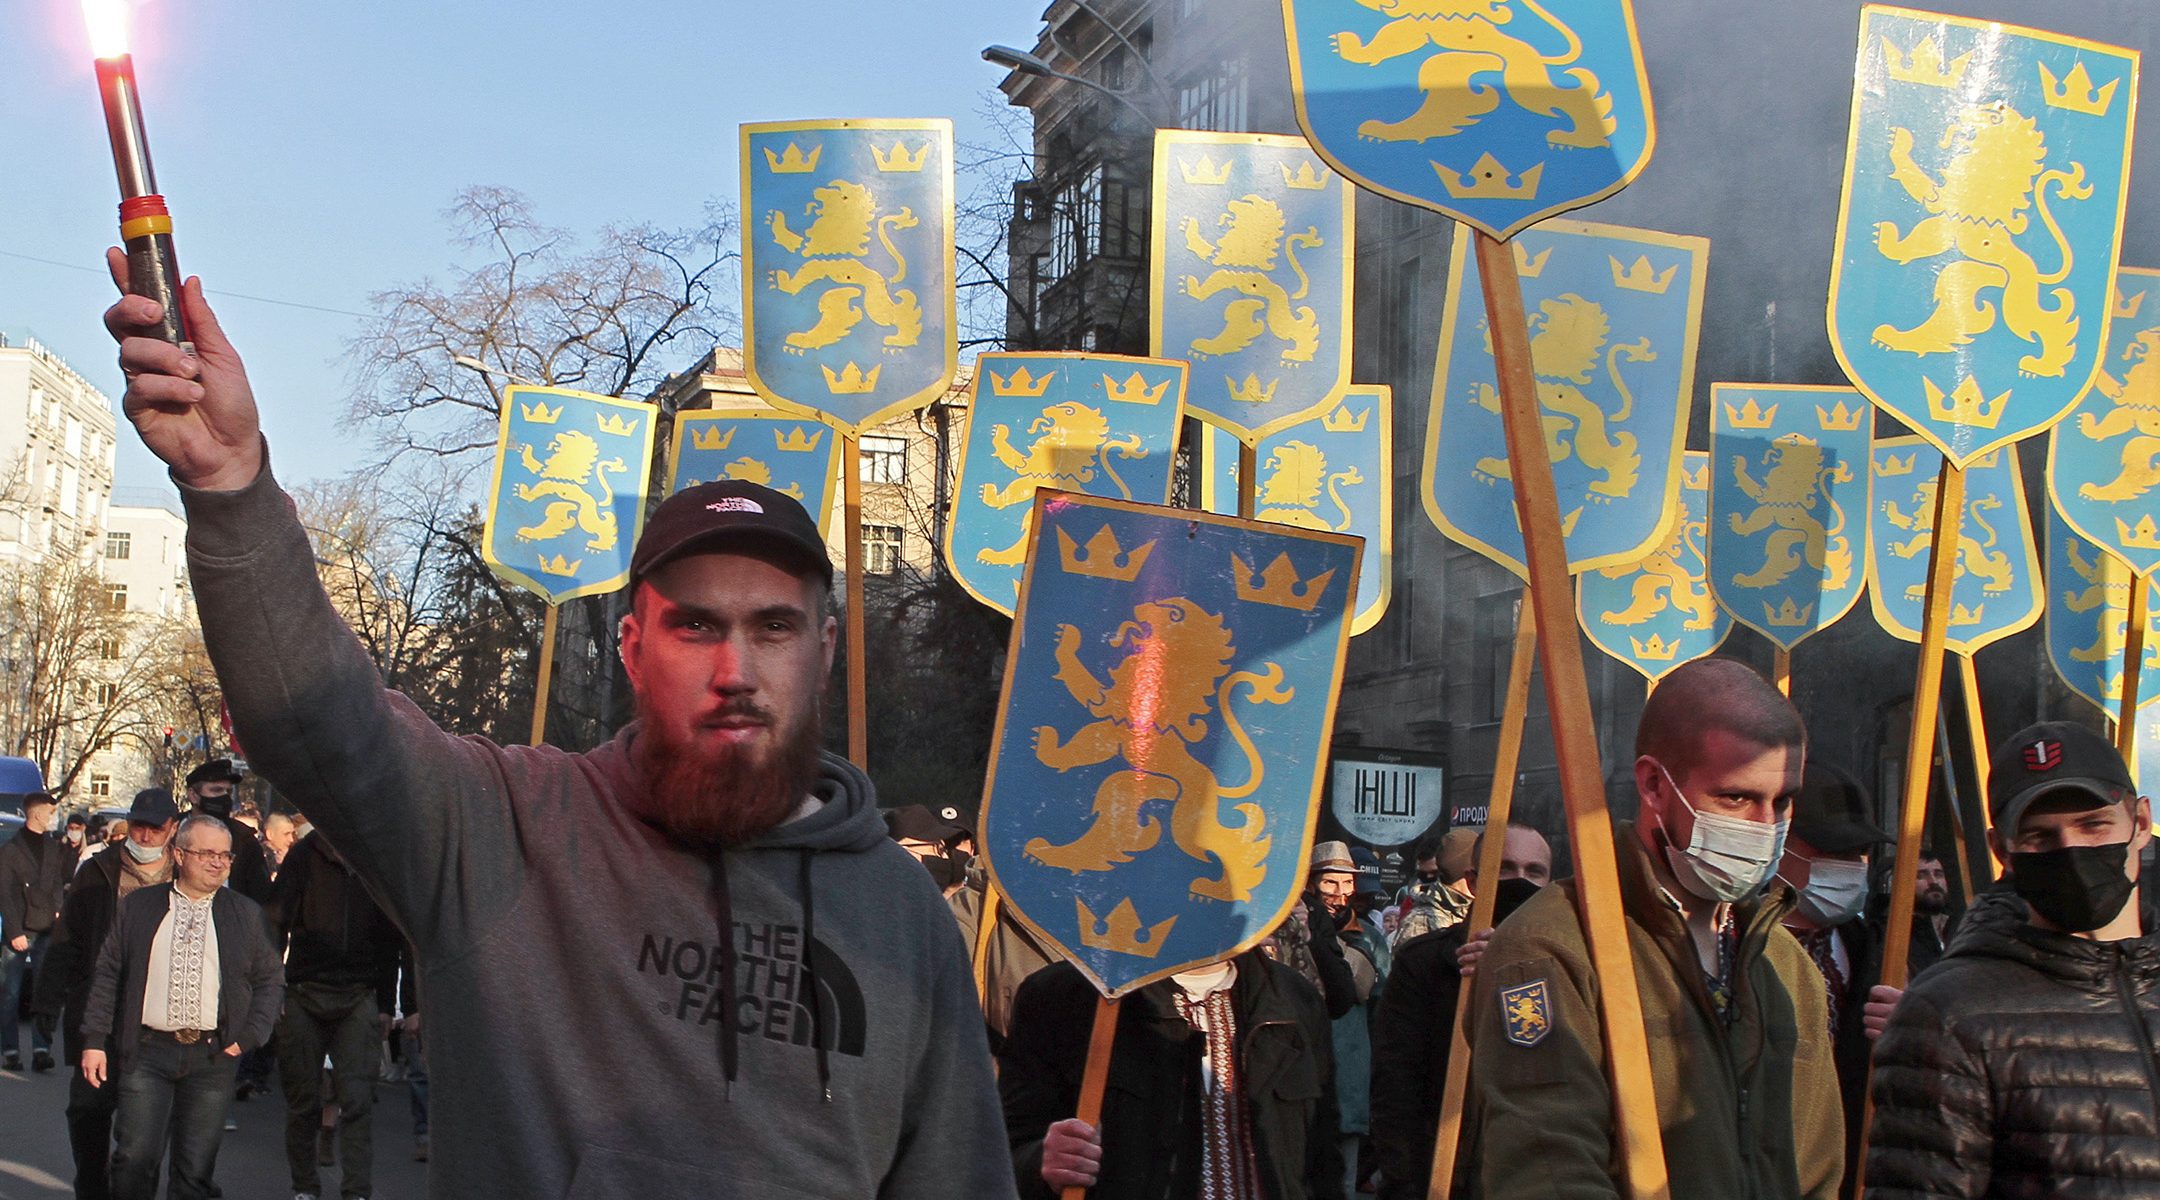 Marchers hold up the symbol of the 14th Waffen Grenadier Division of the SS in Kyiv, Ukraine on April 28, 2021. (Anna Marchenko\TASS via Getty Images)